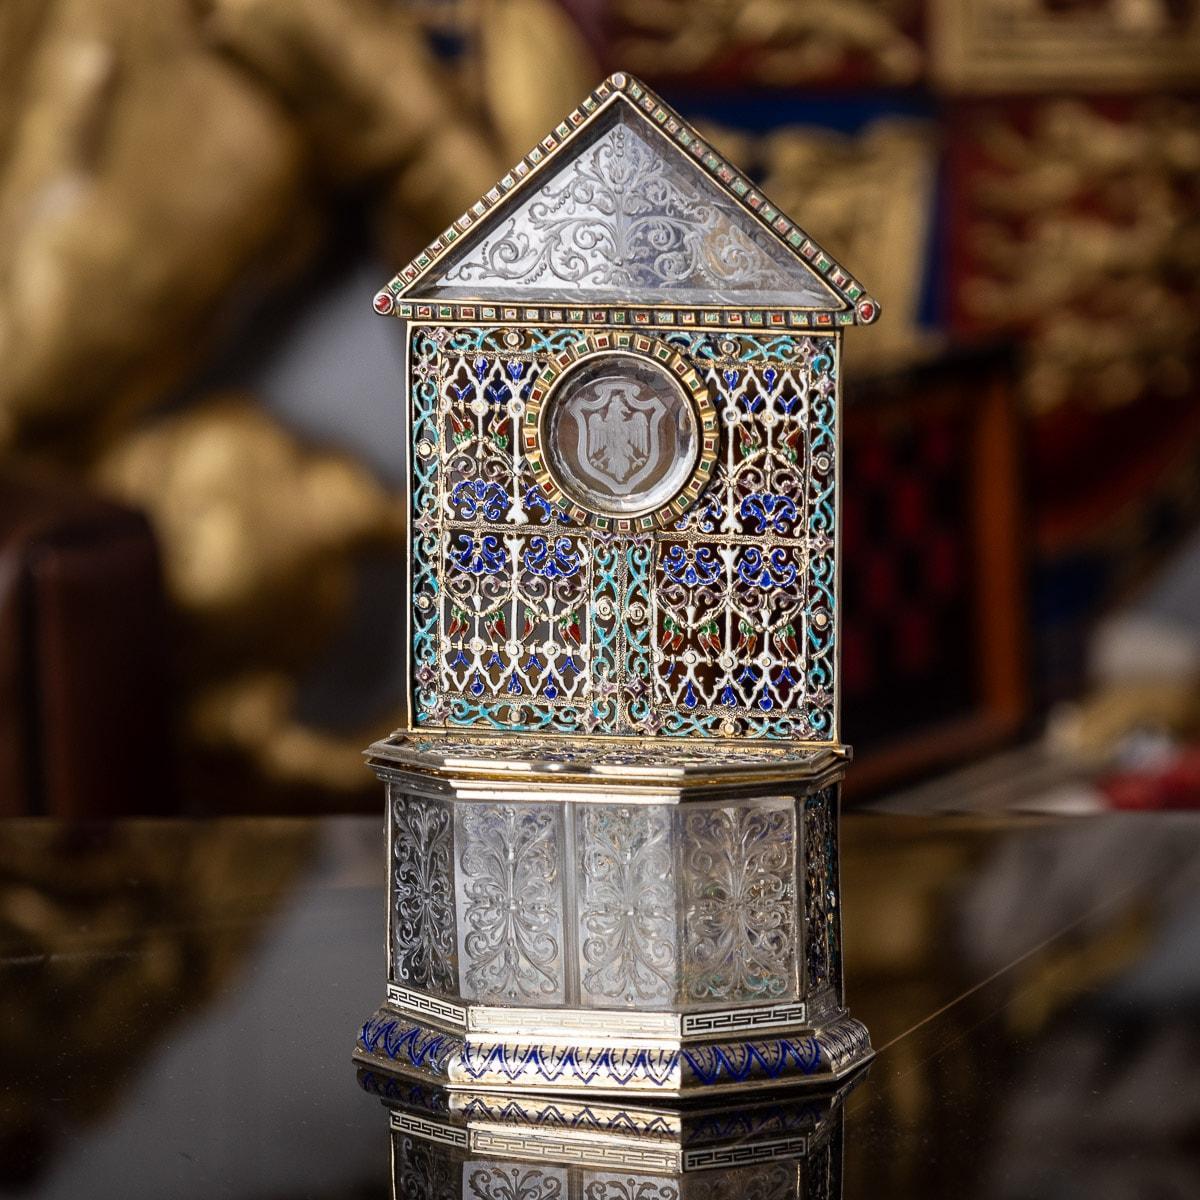 Antique 19th century Austrian rare and unusual solid silver-gilt and enamel reliquary, pierced and decorated with multicolored enamels, sides set with carved rock crystal panels and a carved plaque depicting a crest of the city of Vienna, the hinged